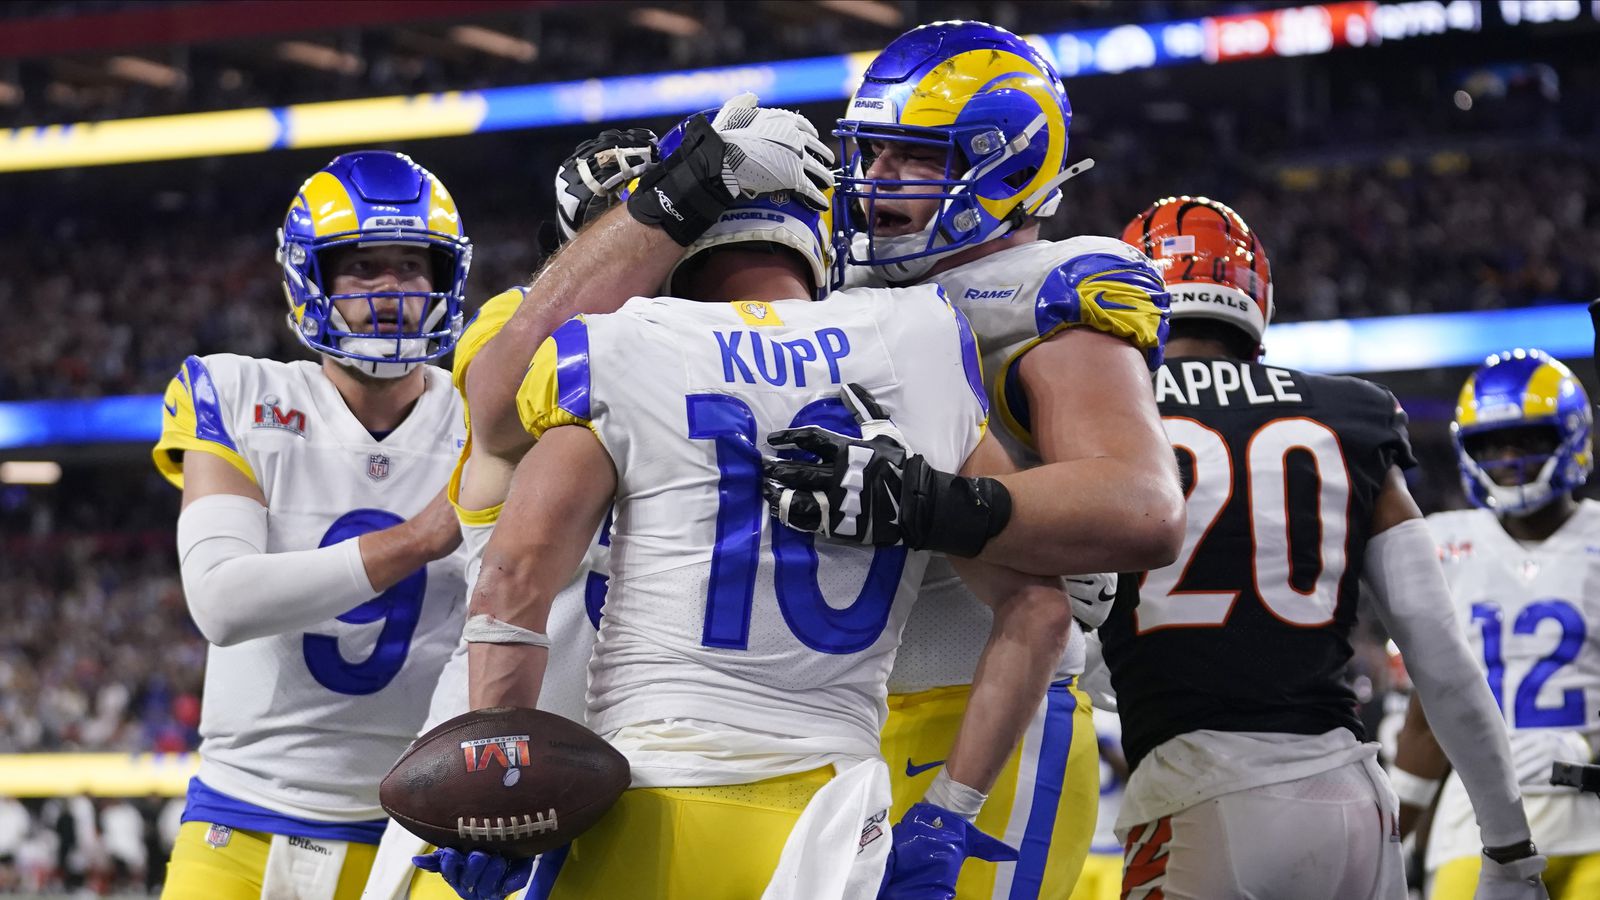 Cooper Kupp's late TD lifts Rams over Bengals in Super Bowl